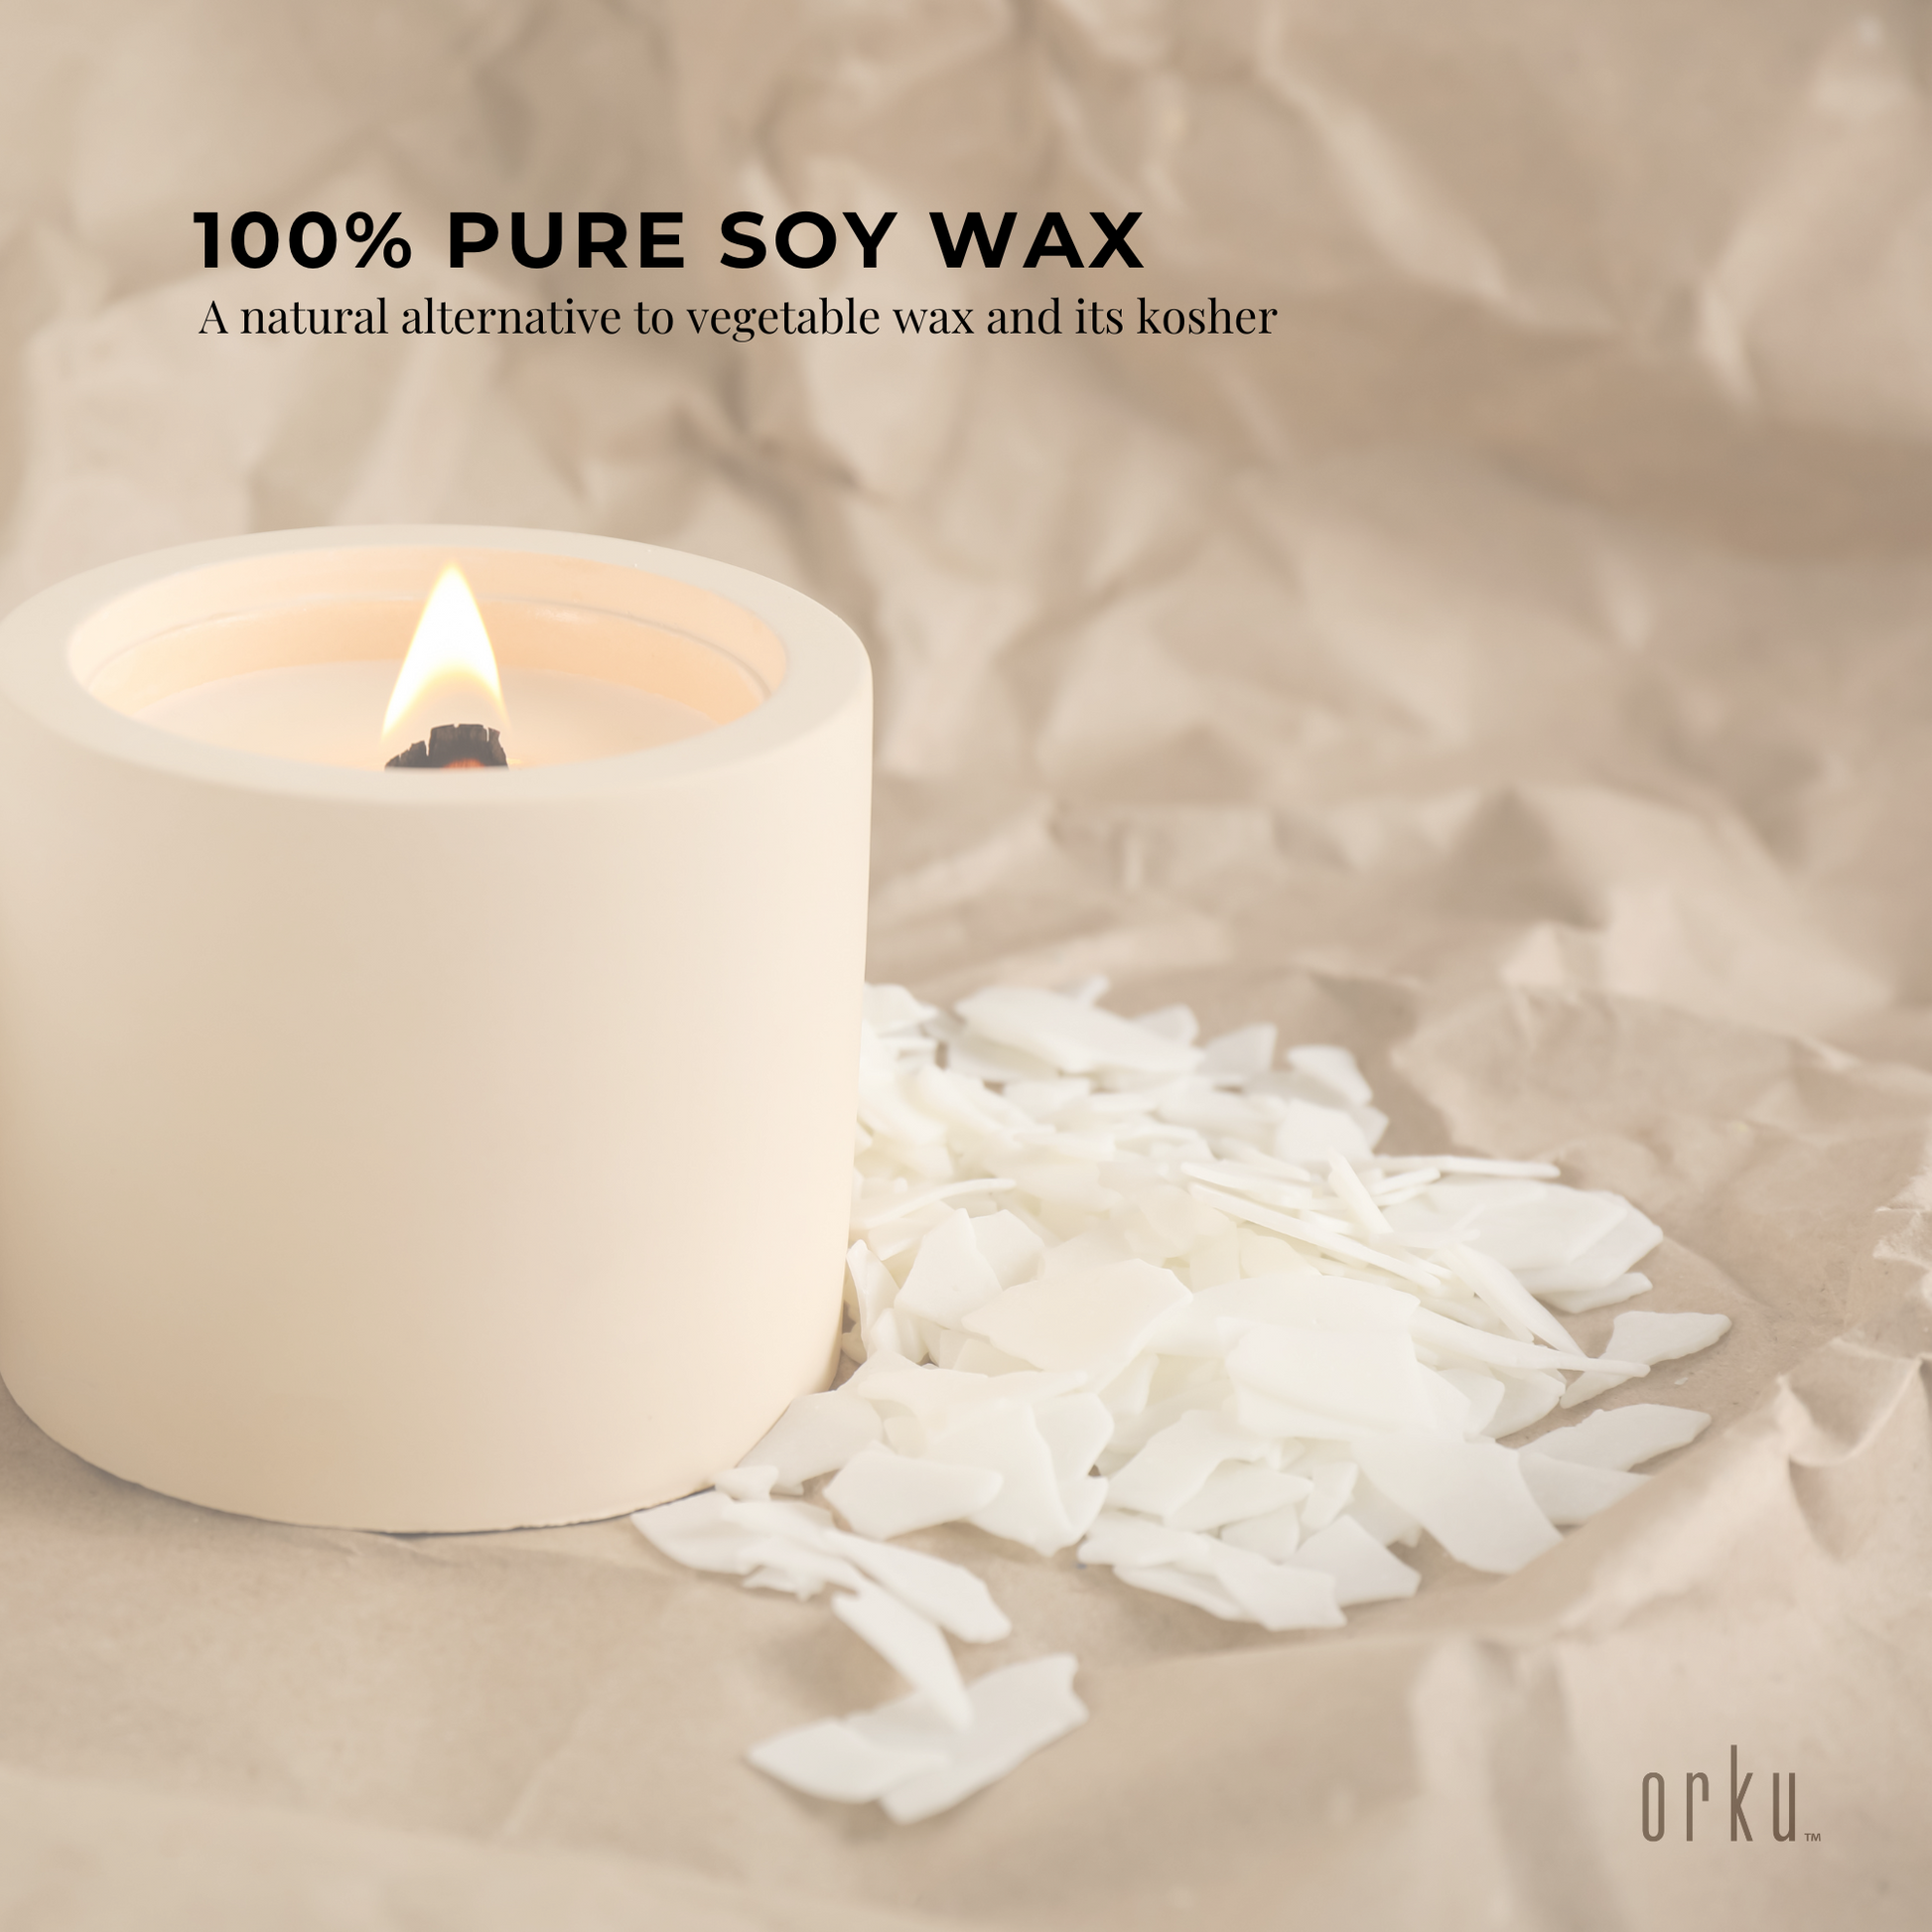 Golden 464 Soy Wax Flakes - 100% Pure Natural DIY Candle Melts Chips - Bulk